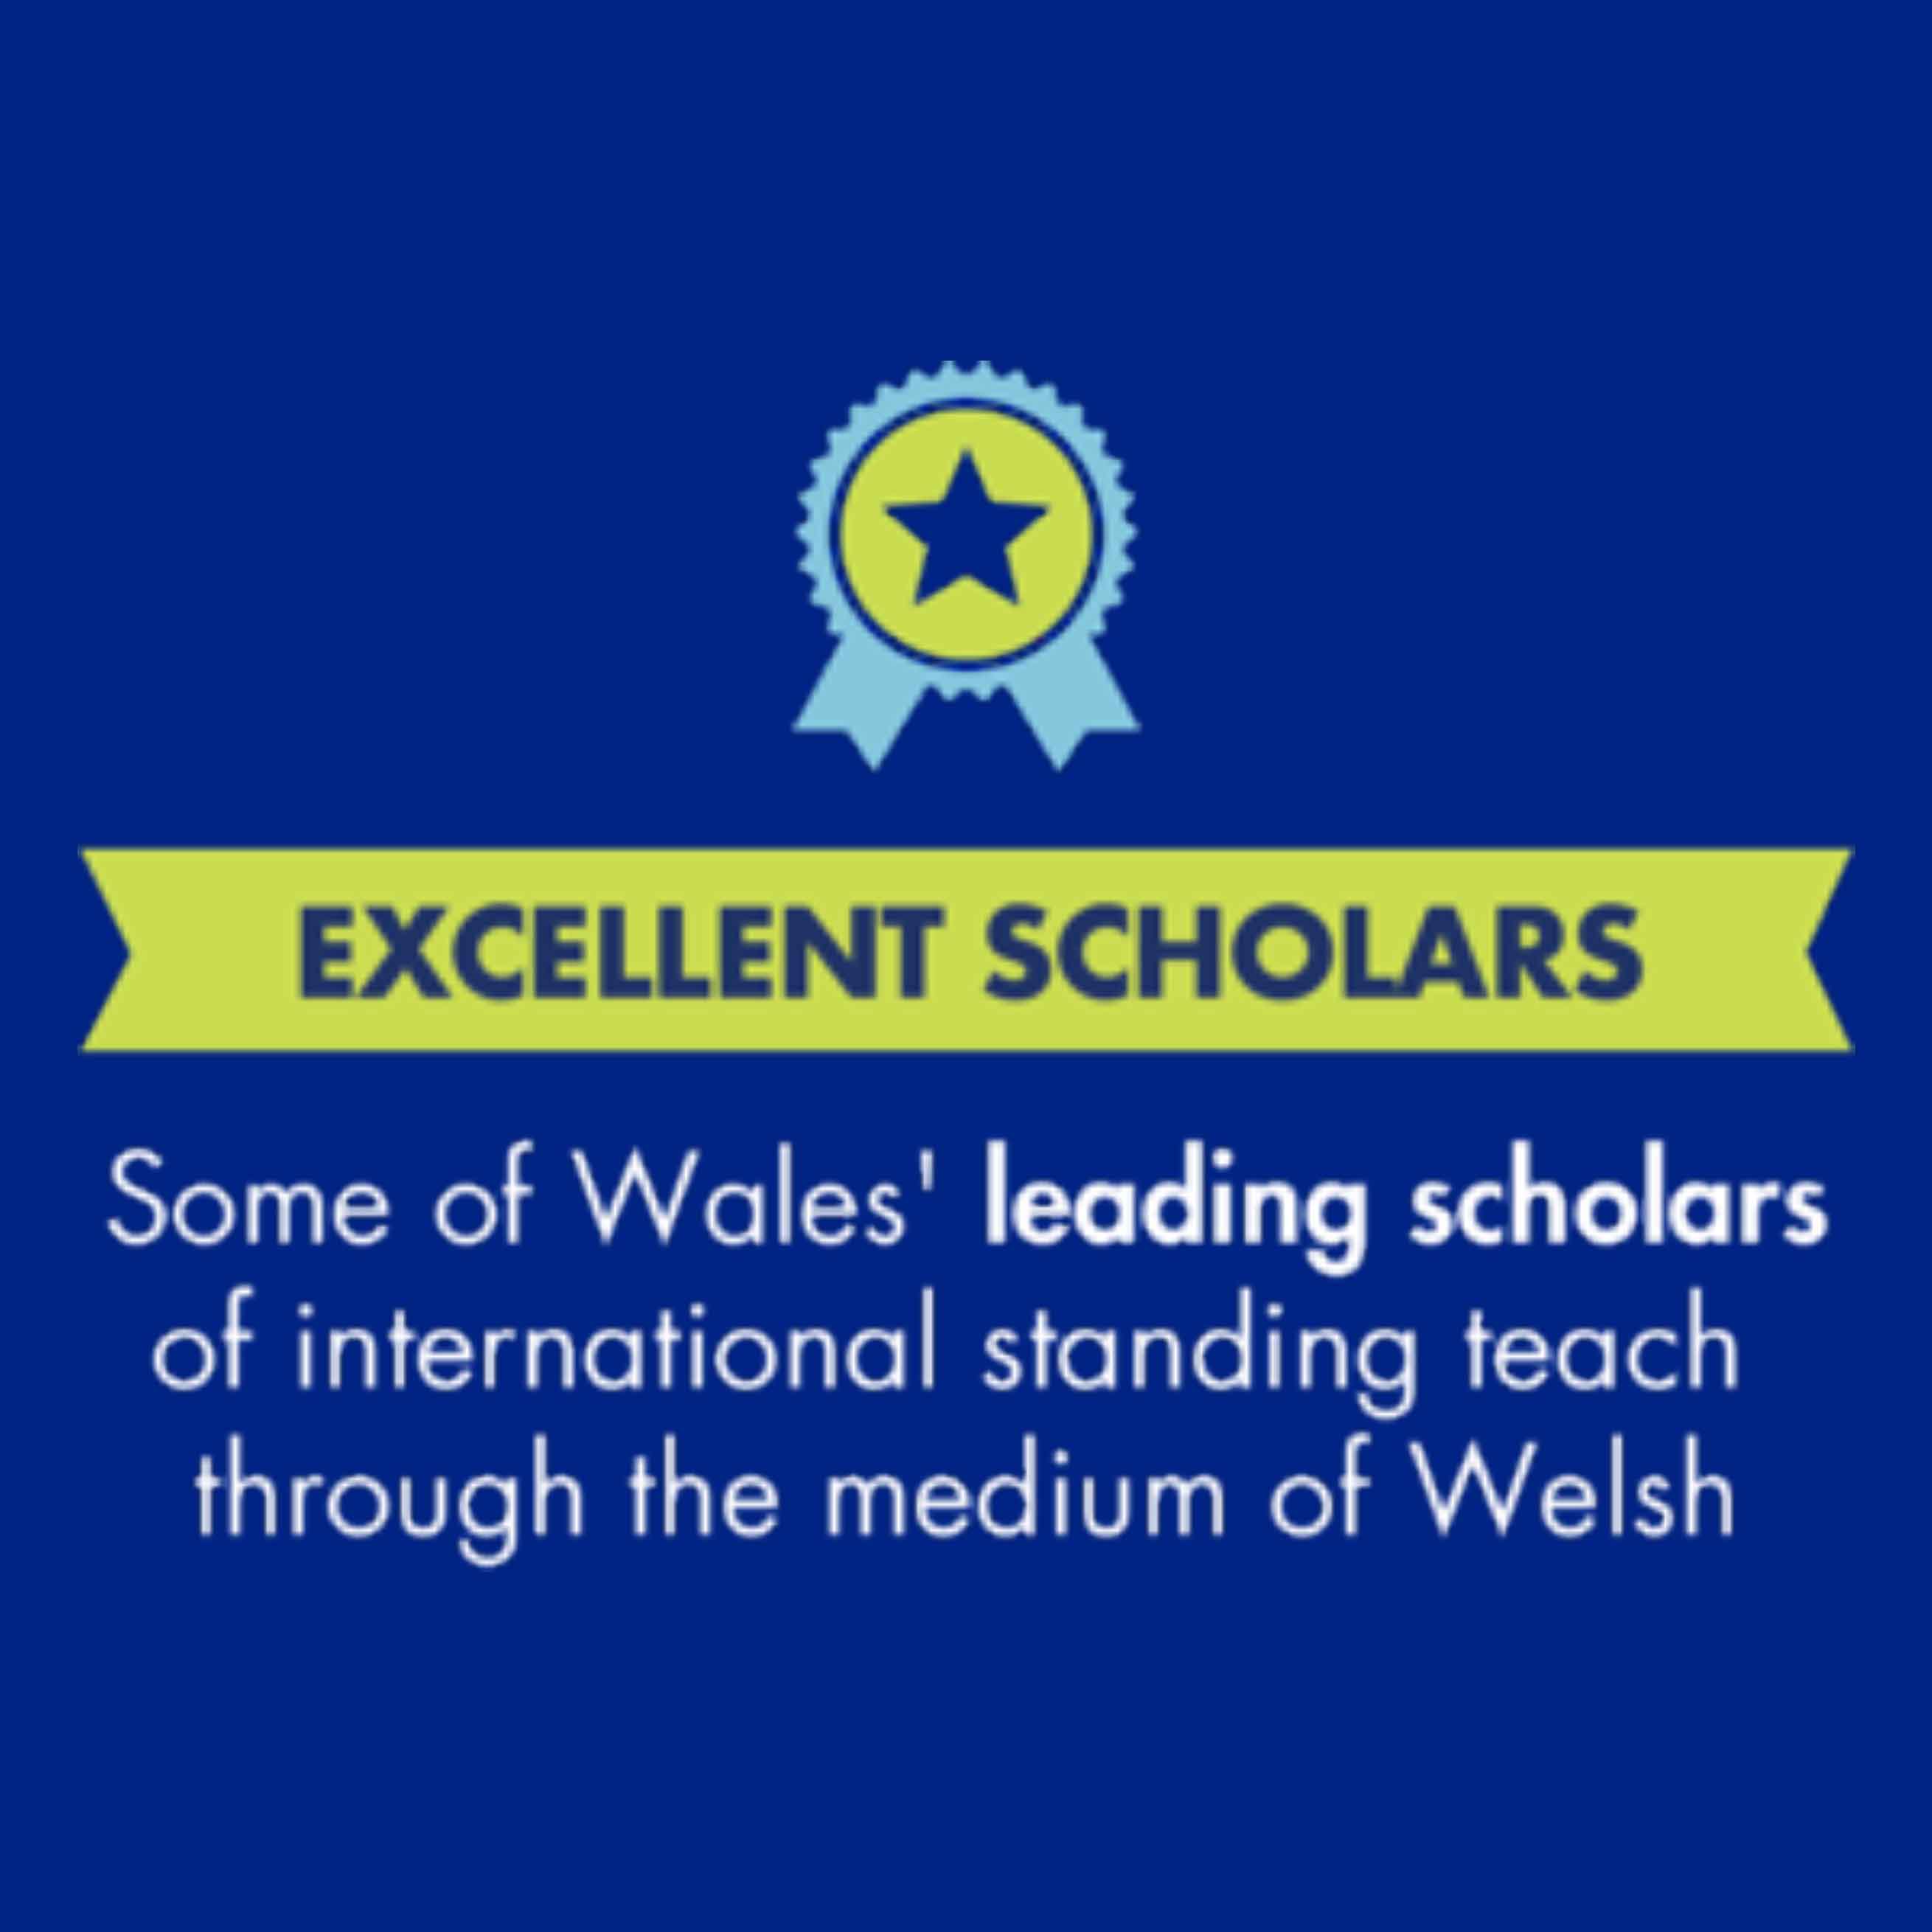 Some of Wales' leading scholars of international standing teach through the medium of Welsh